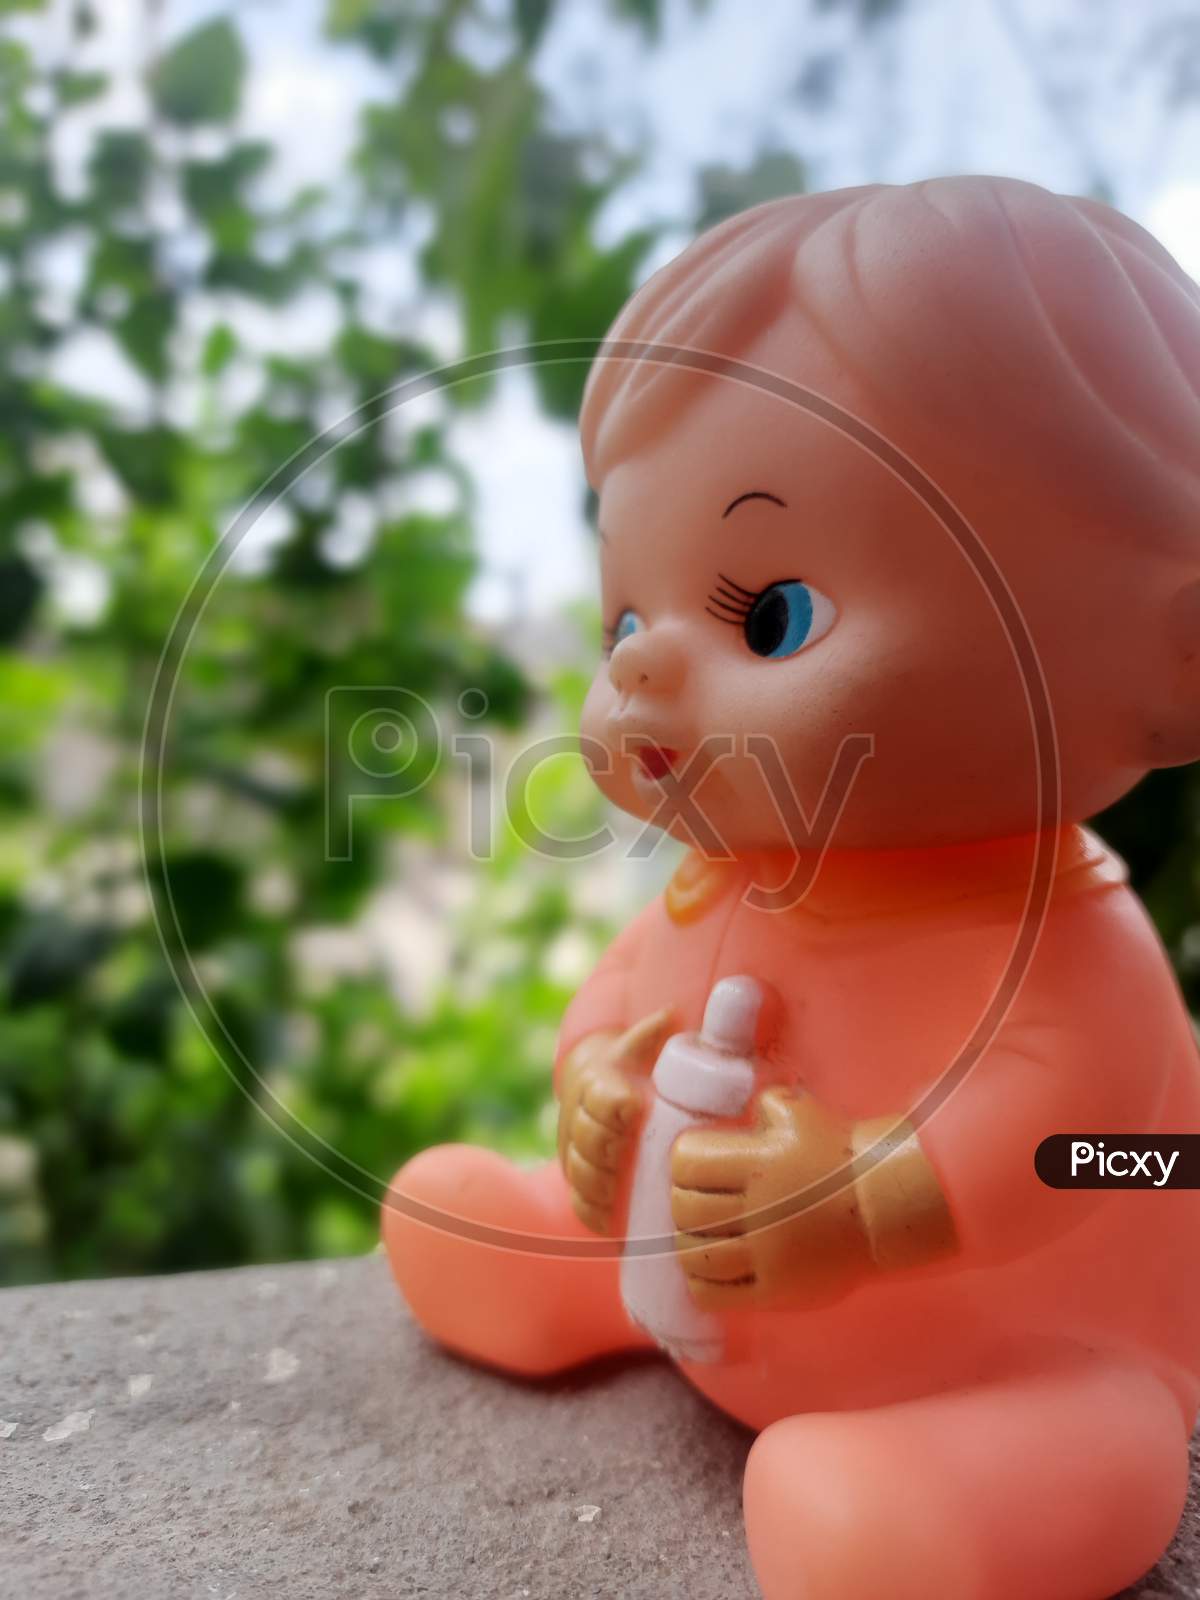 a baby toy with blue eyes small nose and mouth having a bottle of milk holded in hands in blur greenish background